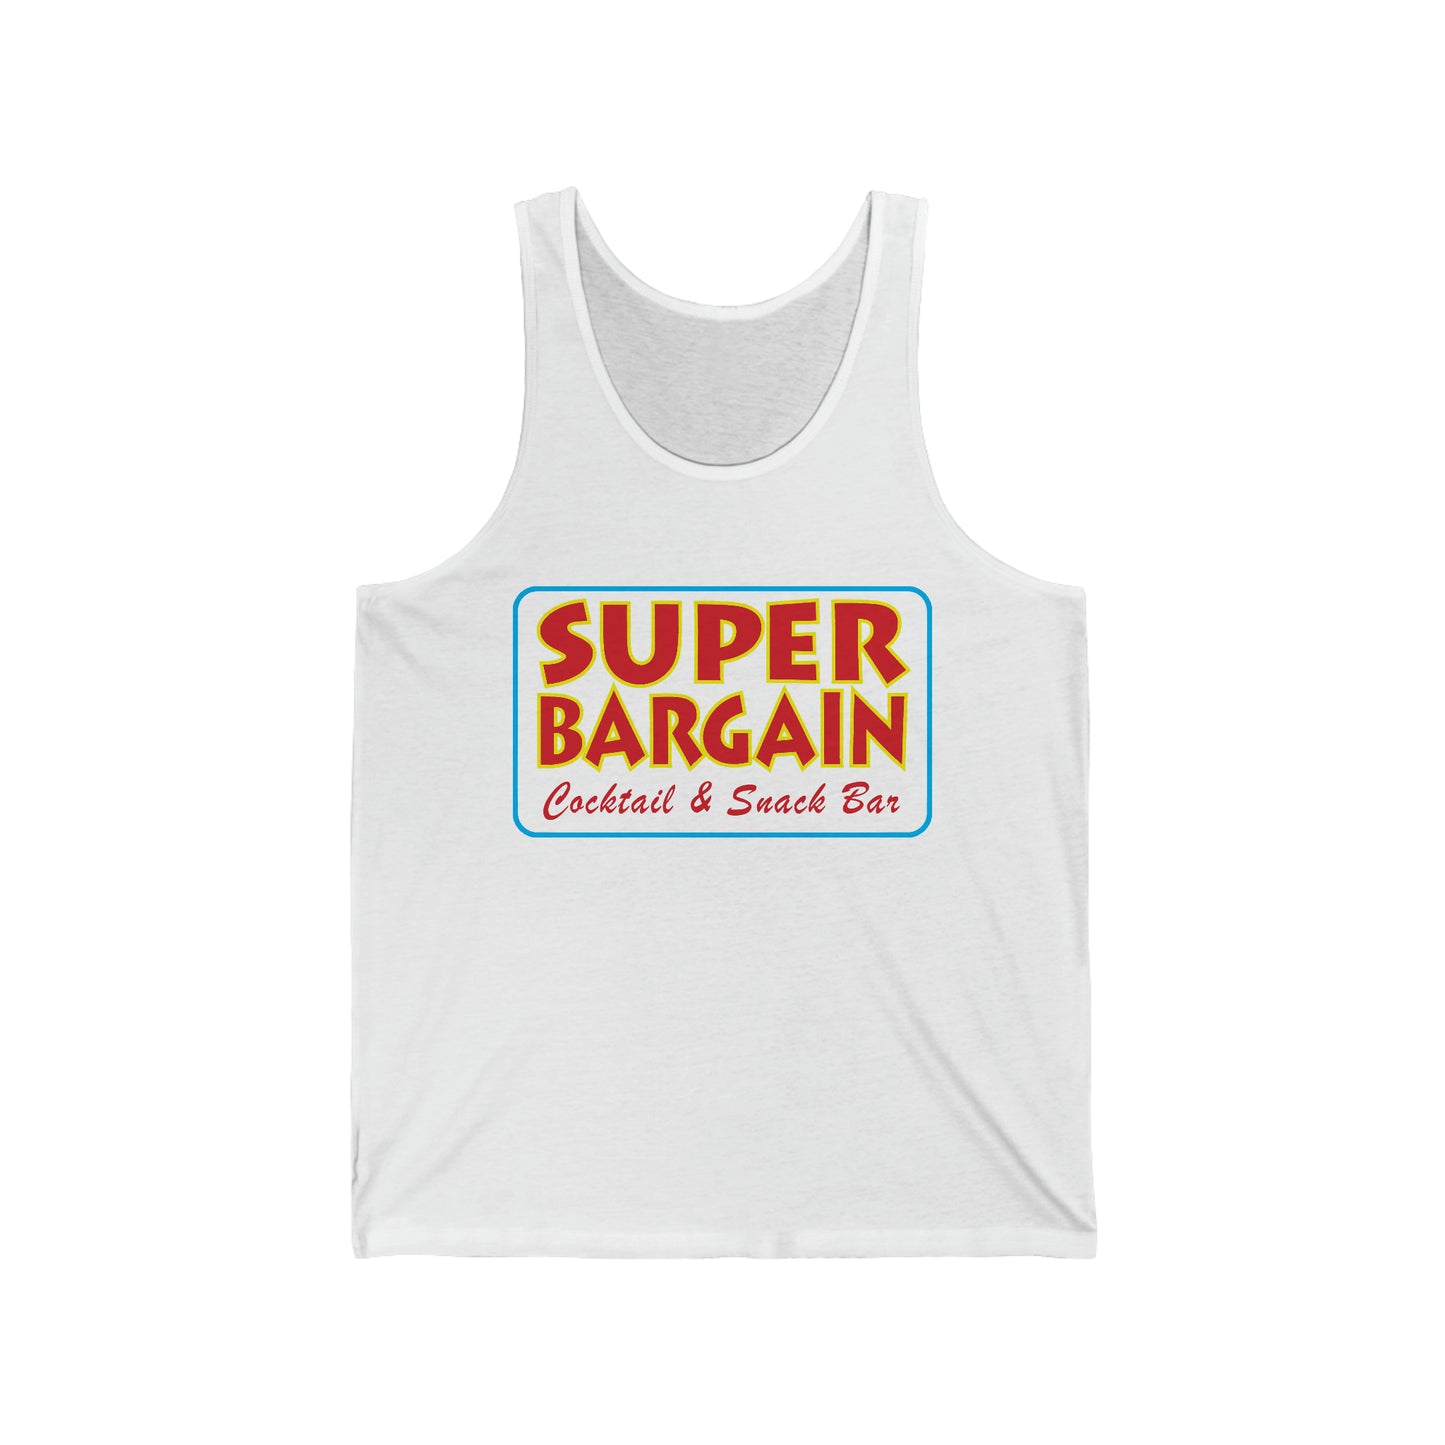 A Printify Unisex Jersey Tank featuring a colorful design with the text "SUPER BARGAIN" in red and yellow, and "Cocktail & Snack Bar - Cabbagetown, Toronto" in smaller blue lettering, all centered within a yellow and red border.